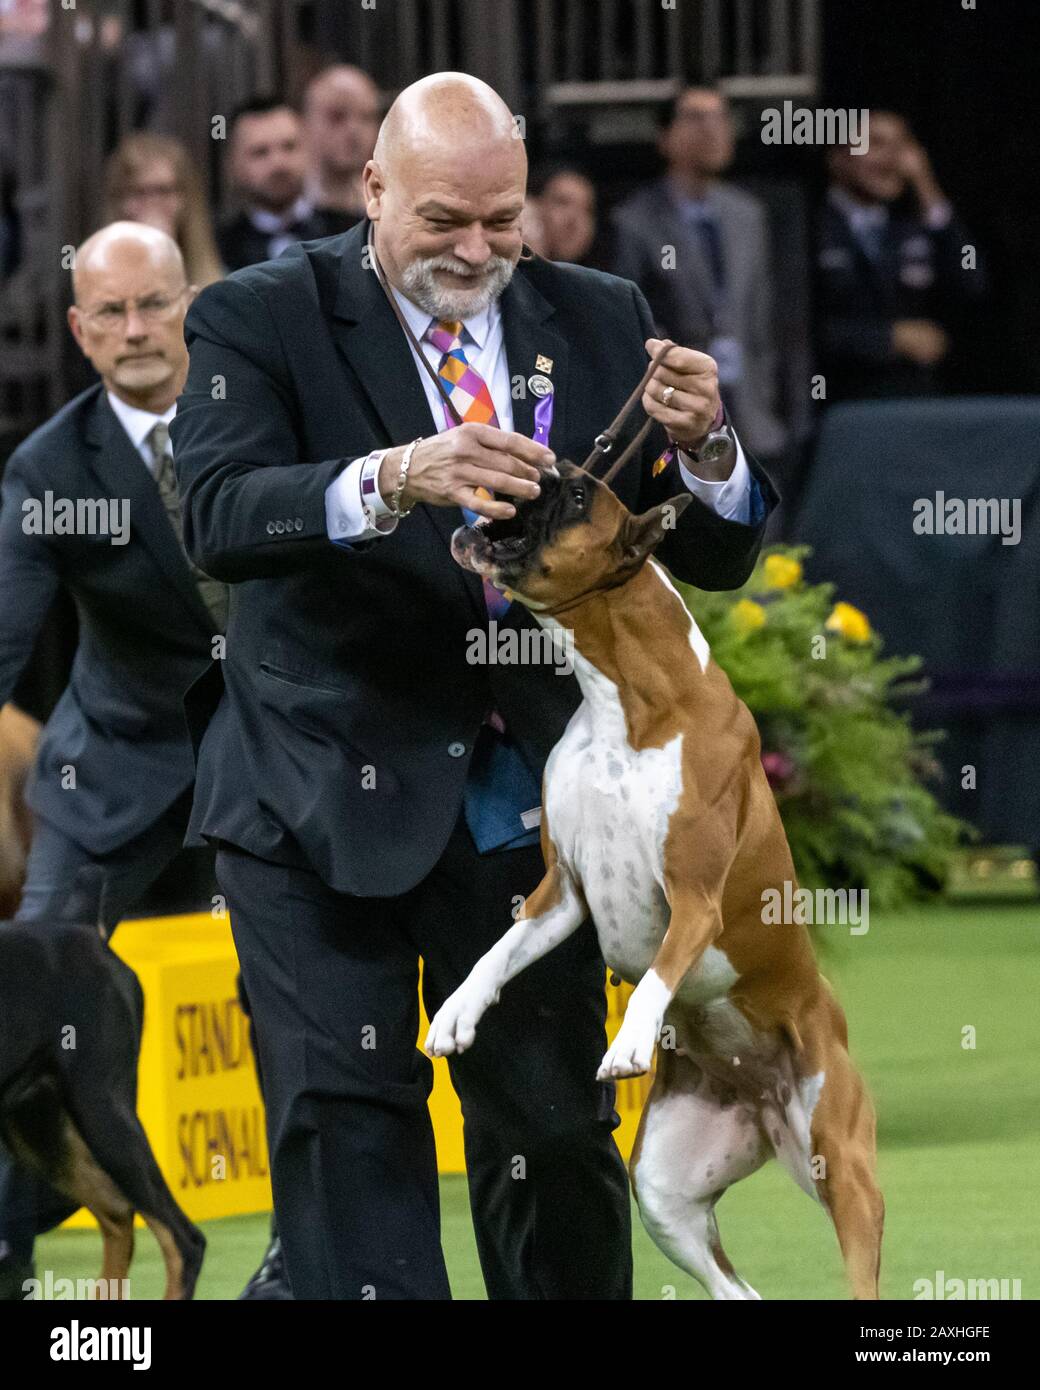 New York, USA. 11th Feb, 2020. Handler Michael Shepherd celebrates with Wilma de boxer after winning the Working Group at the 144th Westminster Kennel Club Dog show in New York city's Madison Square Garden. Wilma had previously won the Best in Breed title. Credit:  Enrique Shore/Alamy Live News Stock Photo